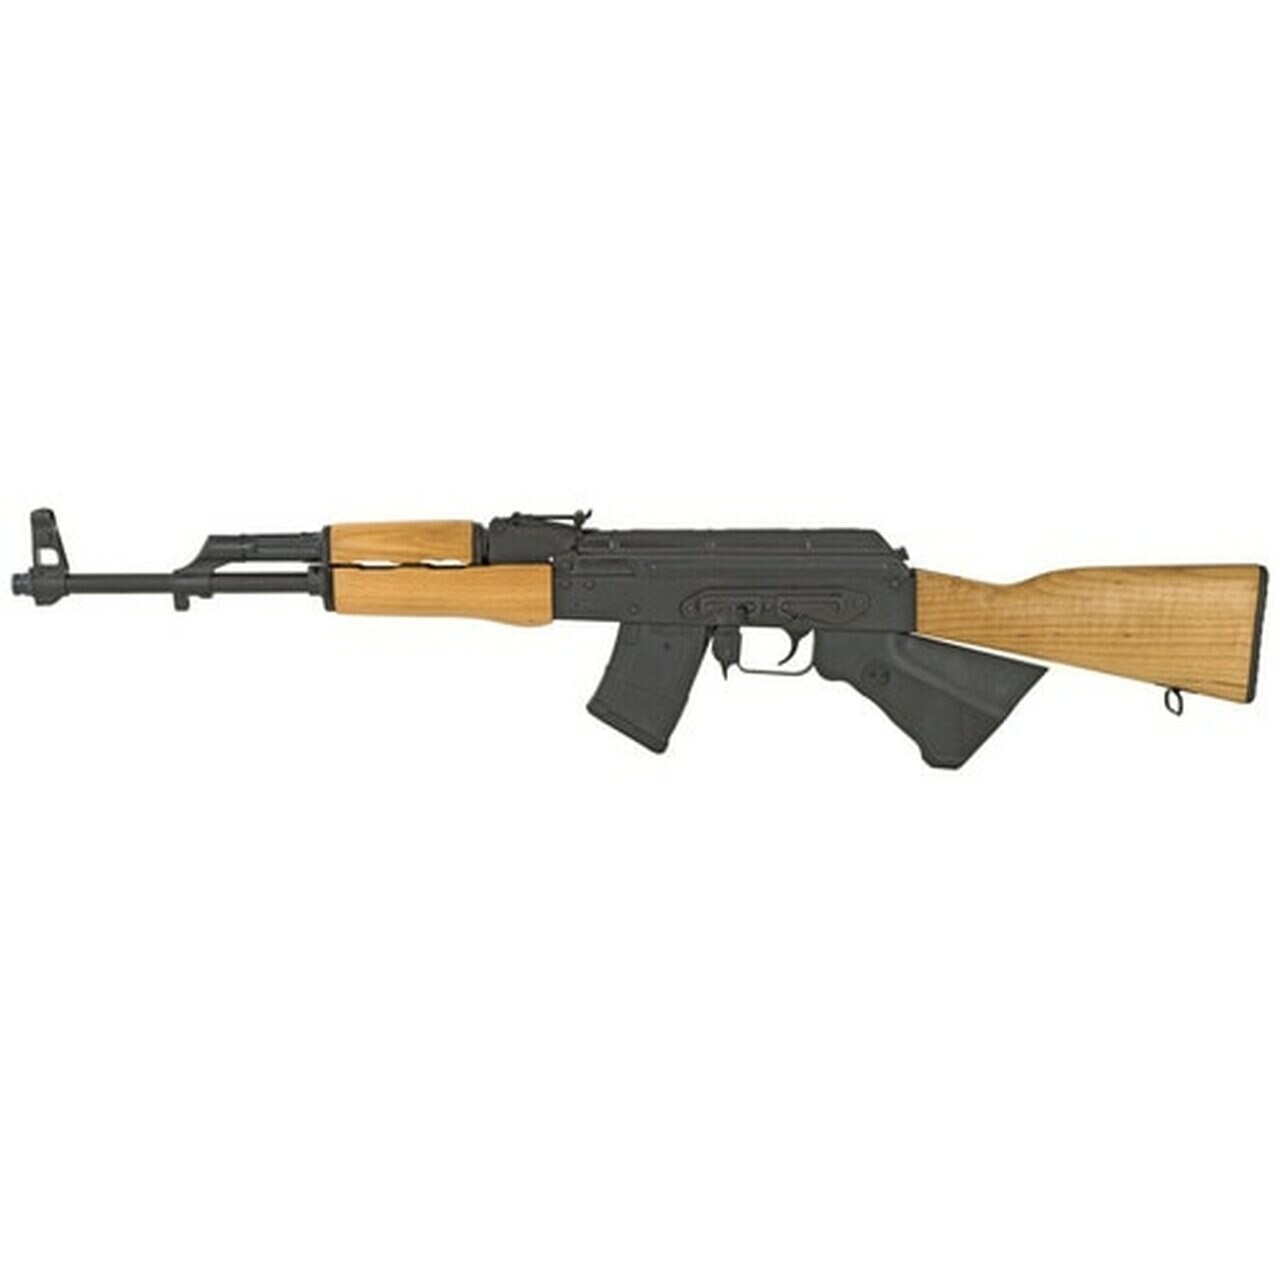 Image of Century Arms GP/WASR10 CA Legal 762X39, 17" Barrel, Blue Finish, Wood Stock, Adjustable Sights, 10Rd Mag